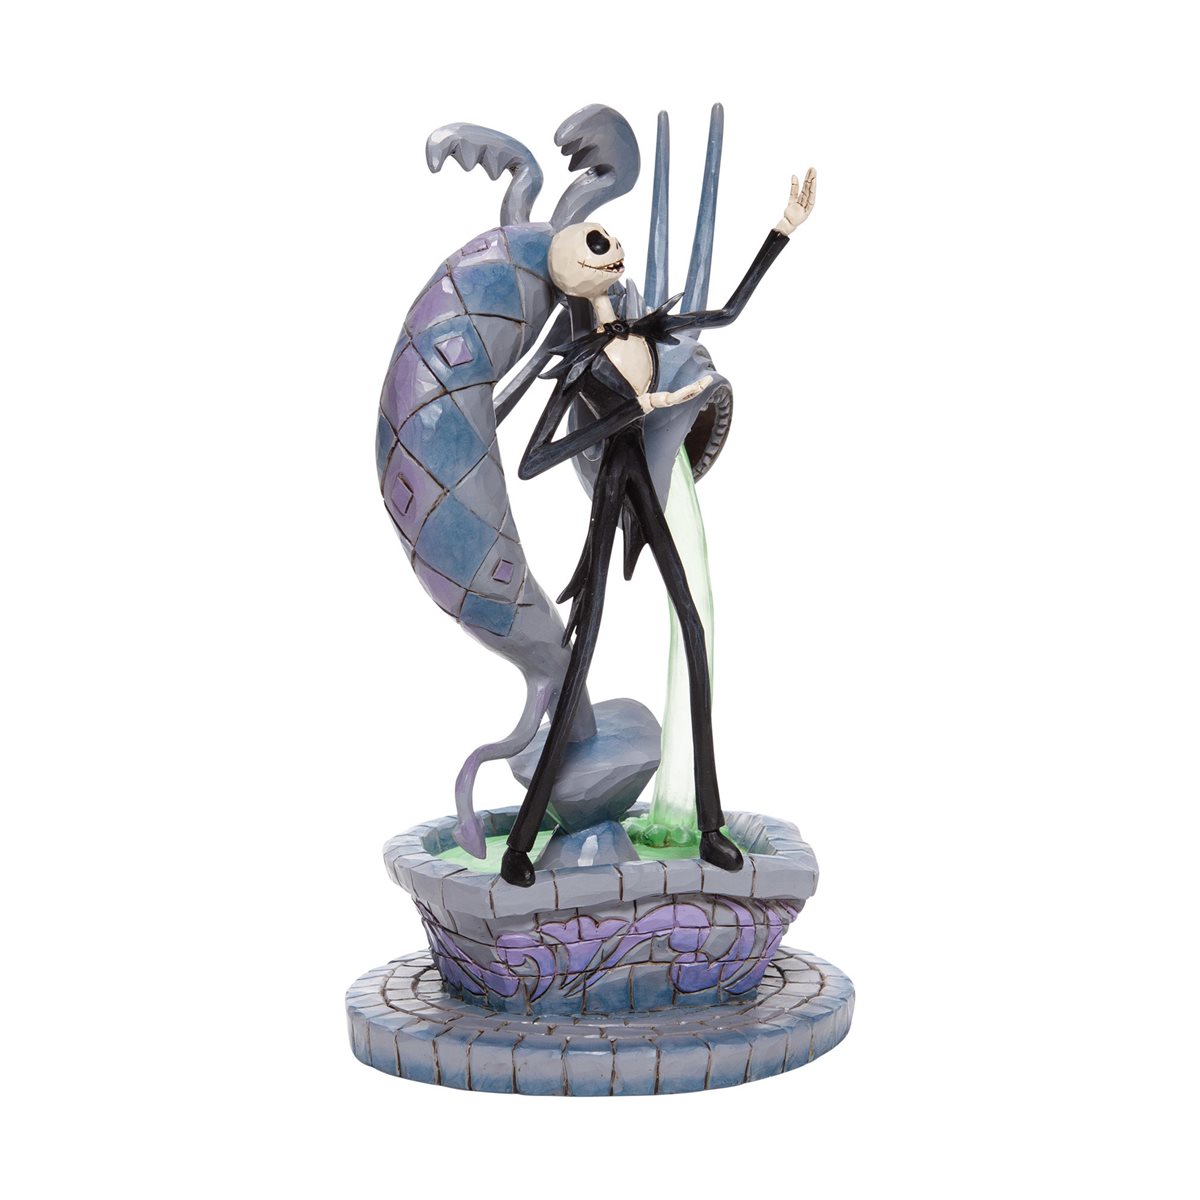 Disney Traditions Nightmare Before Christmas Jack Skellington on Fountain Statue by Jim Shore